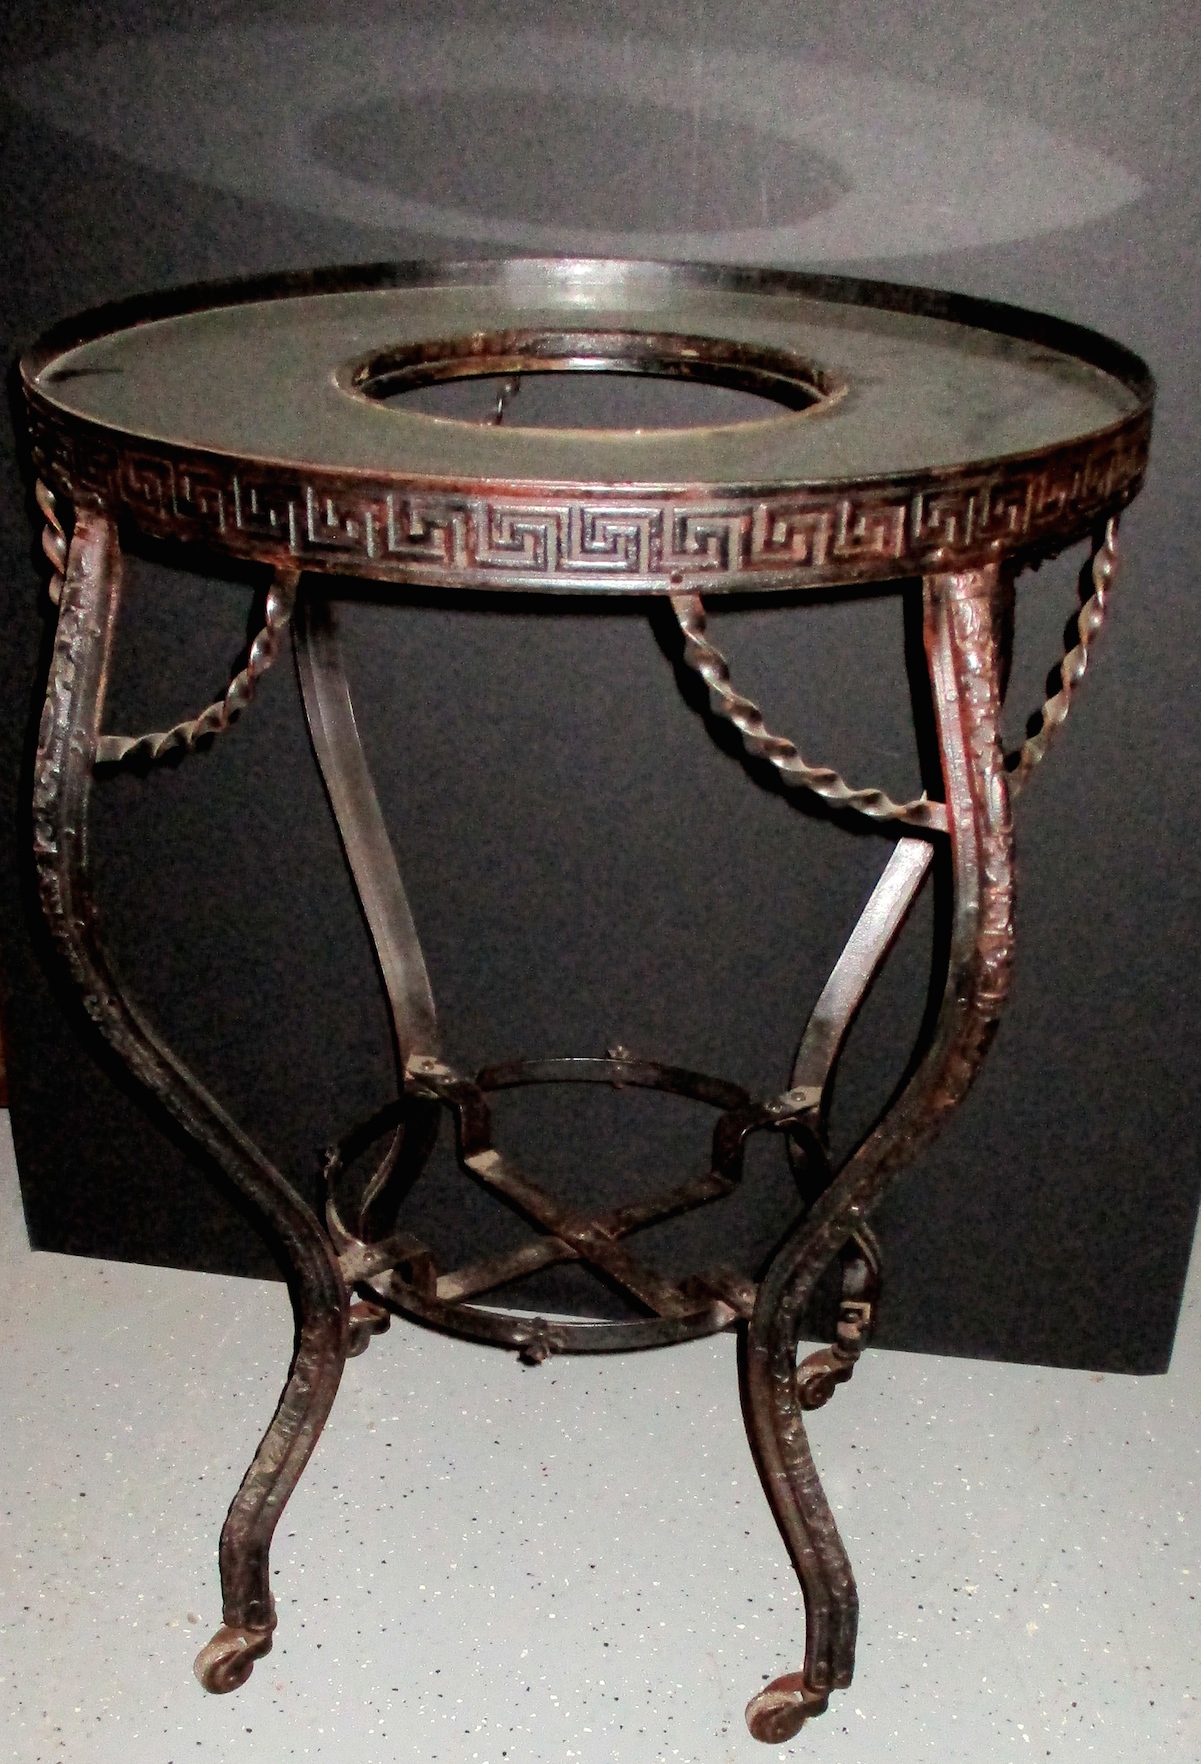 Iron Garden Table w/Central Opening for a Large Planter - SOLD